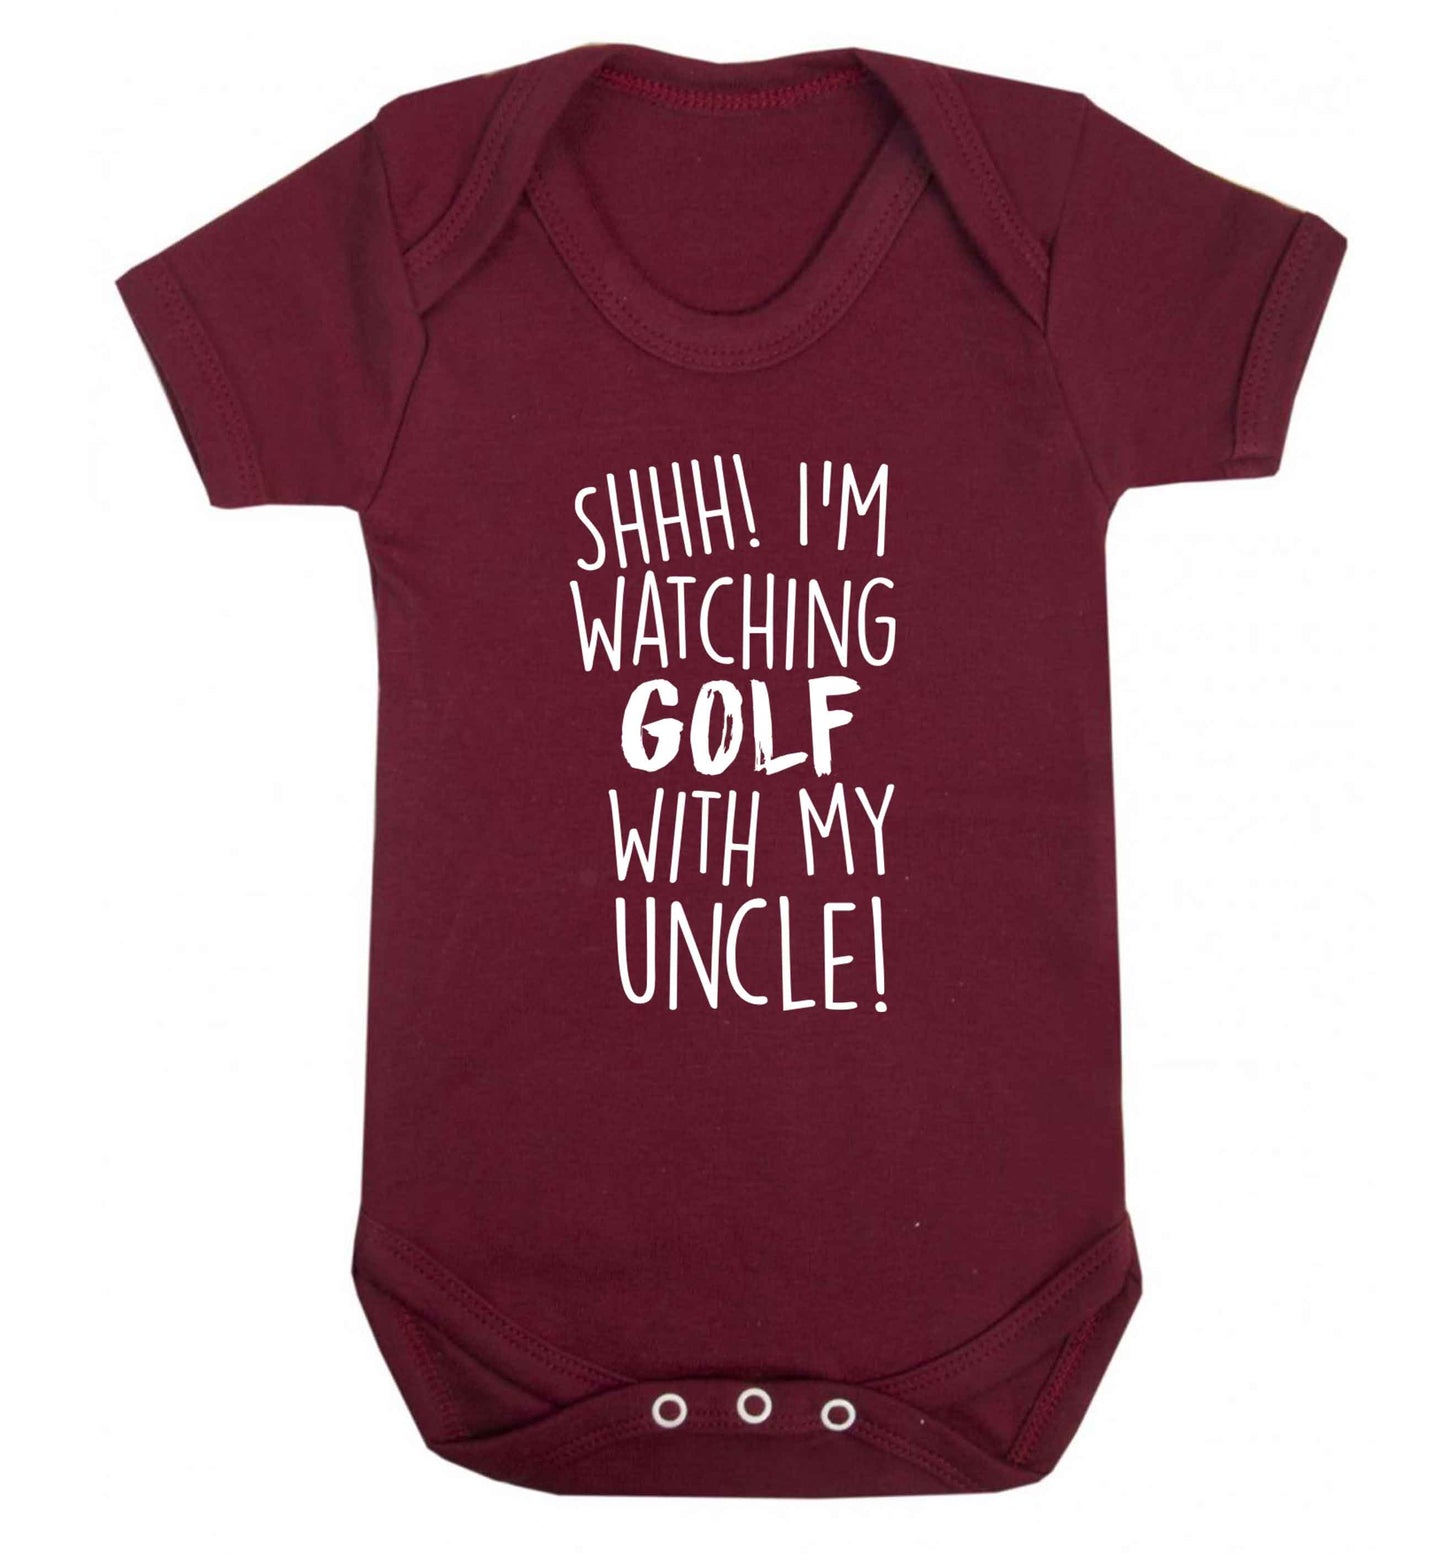 Shh I'm watching golf with my uncle Baby Vest maroon 18-24 months